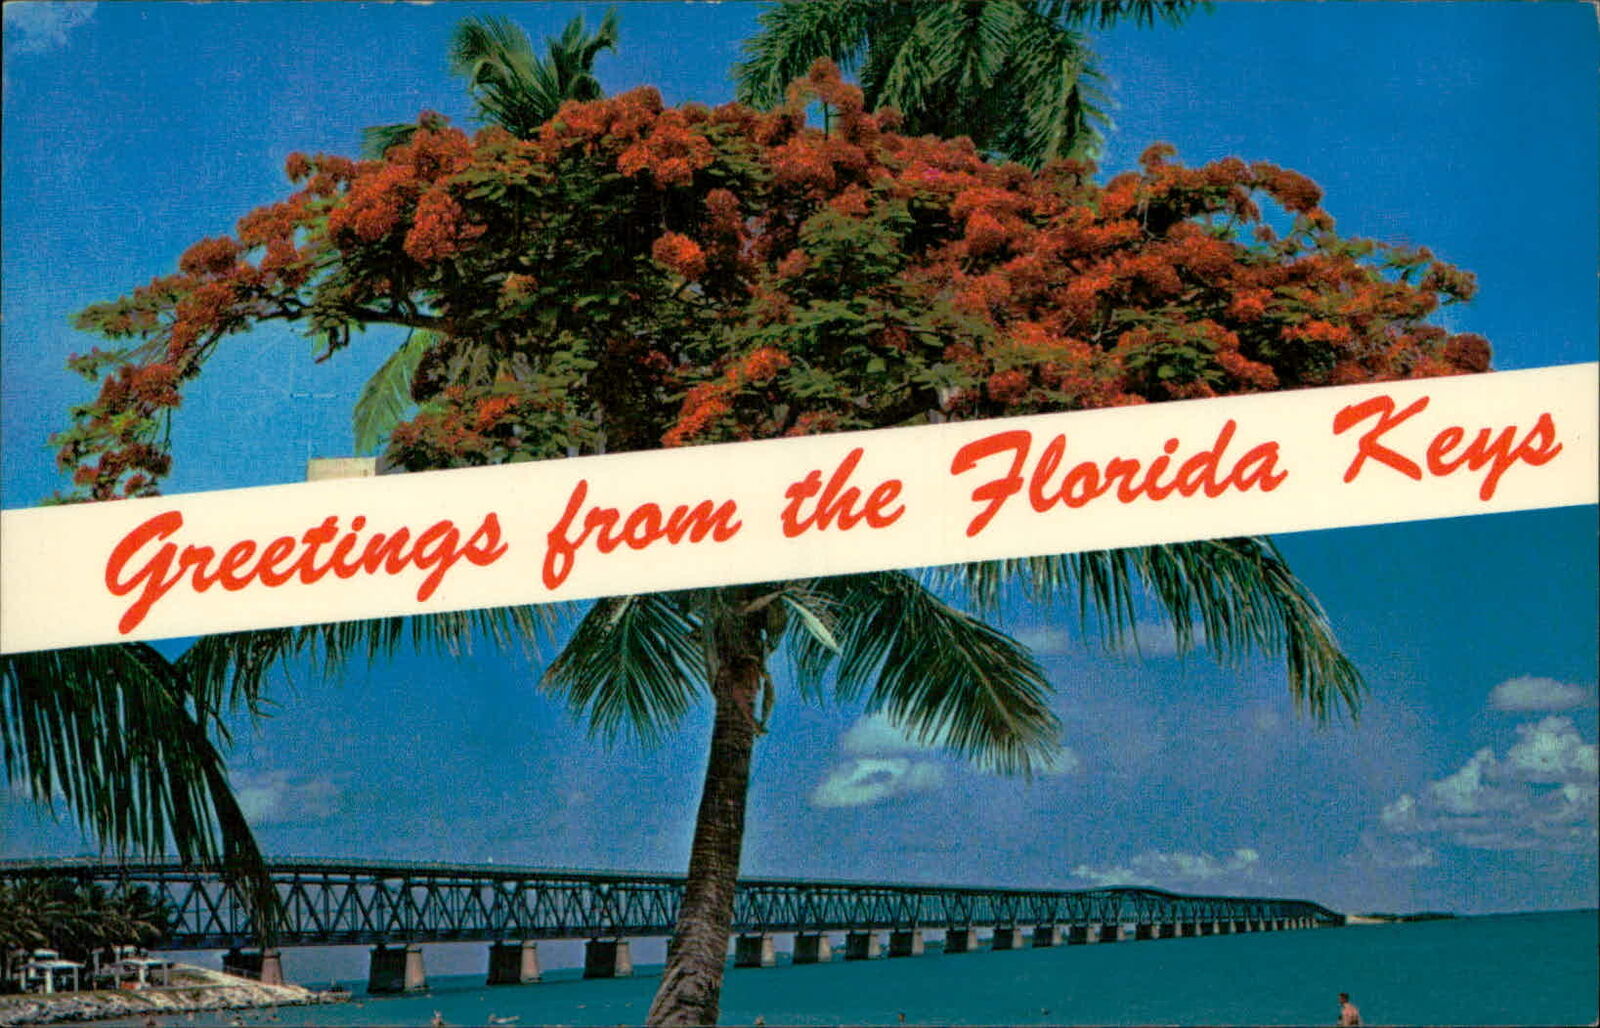 Postcard: Greetings from the Florida Keys